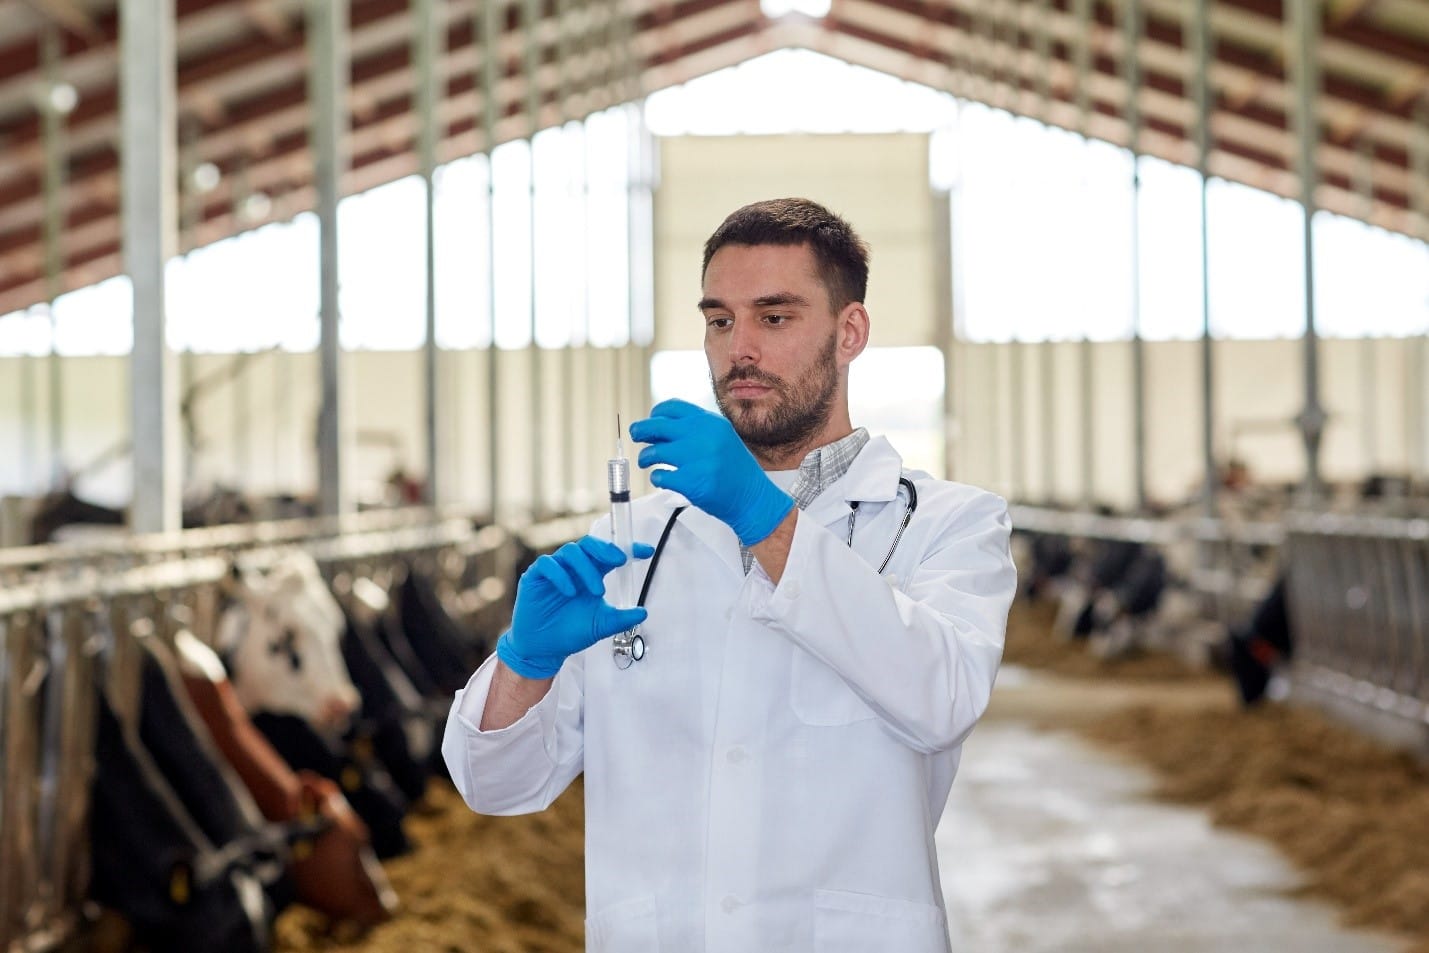 Vaccinating your animals is one of the most important parts of managing your livestock.